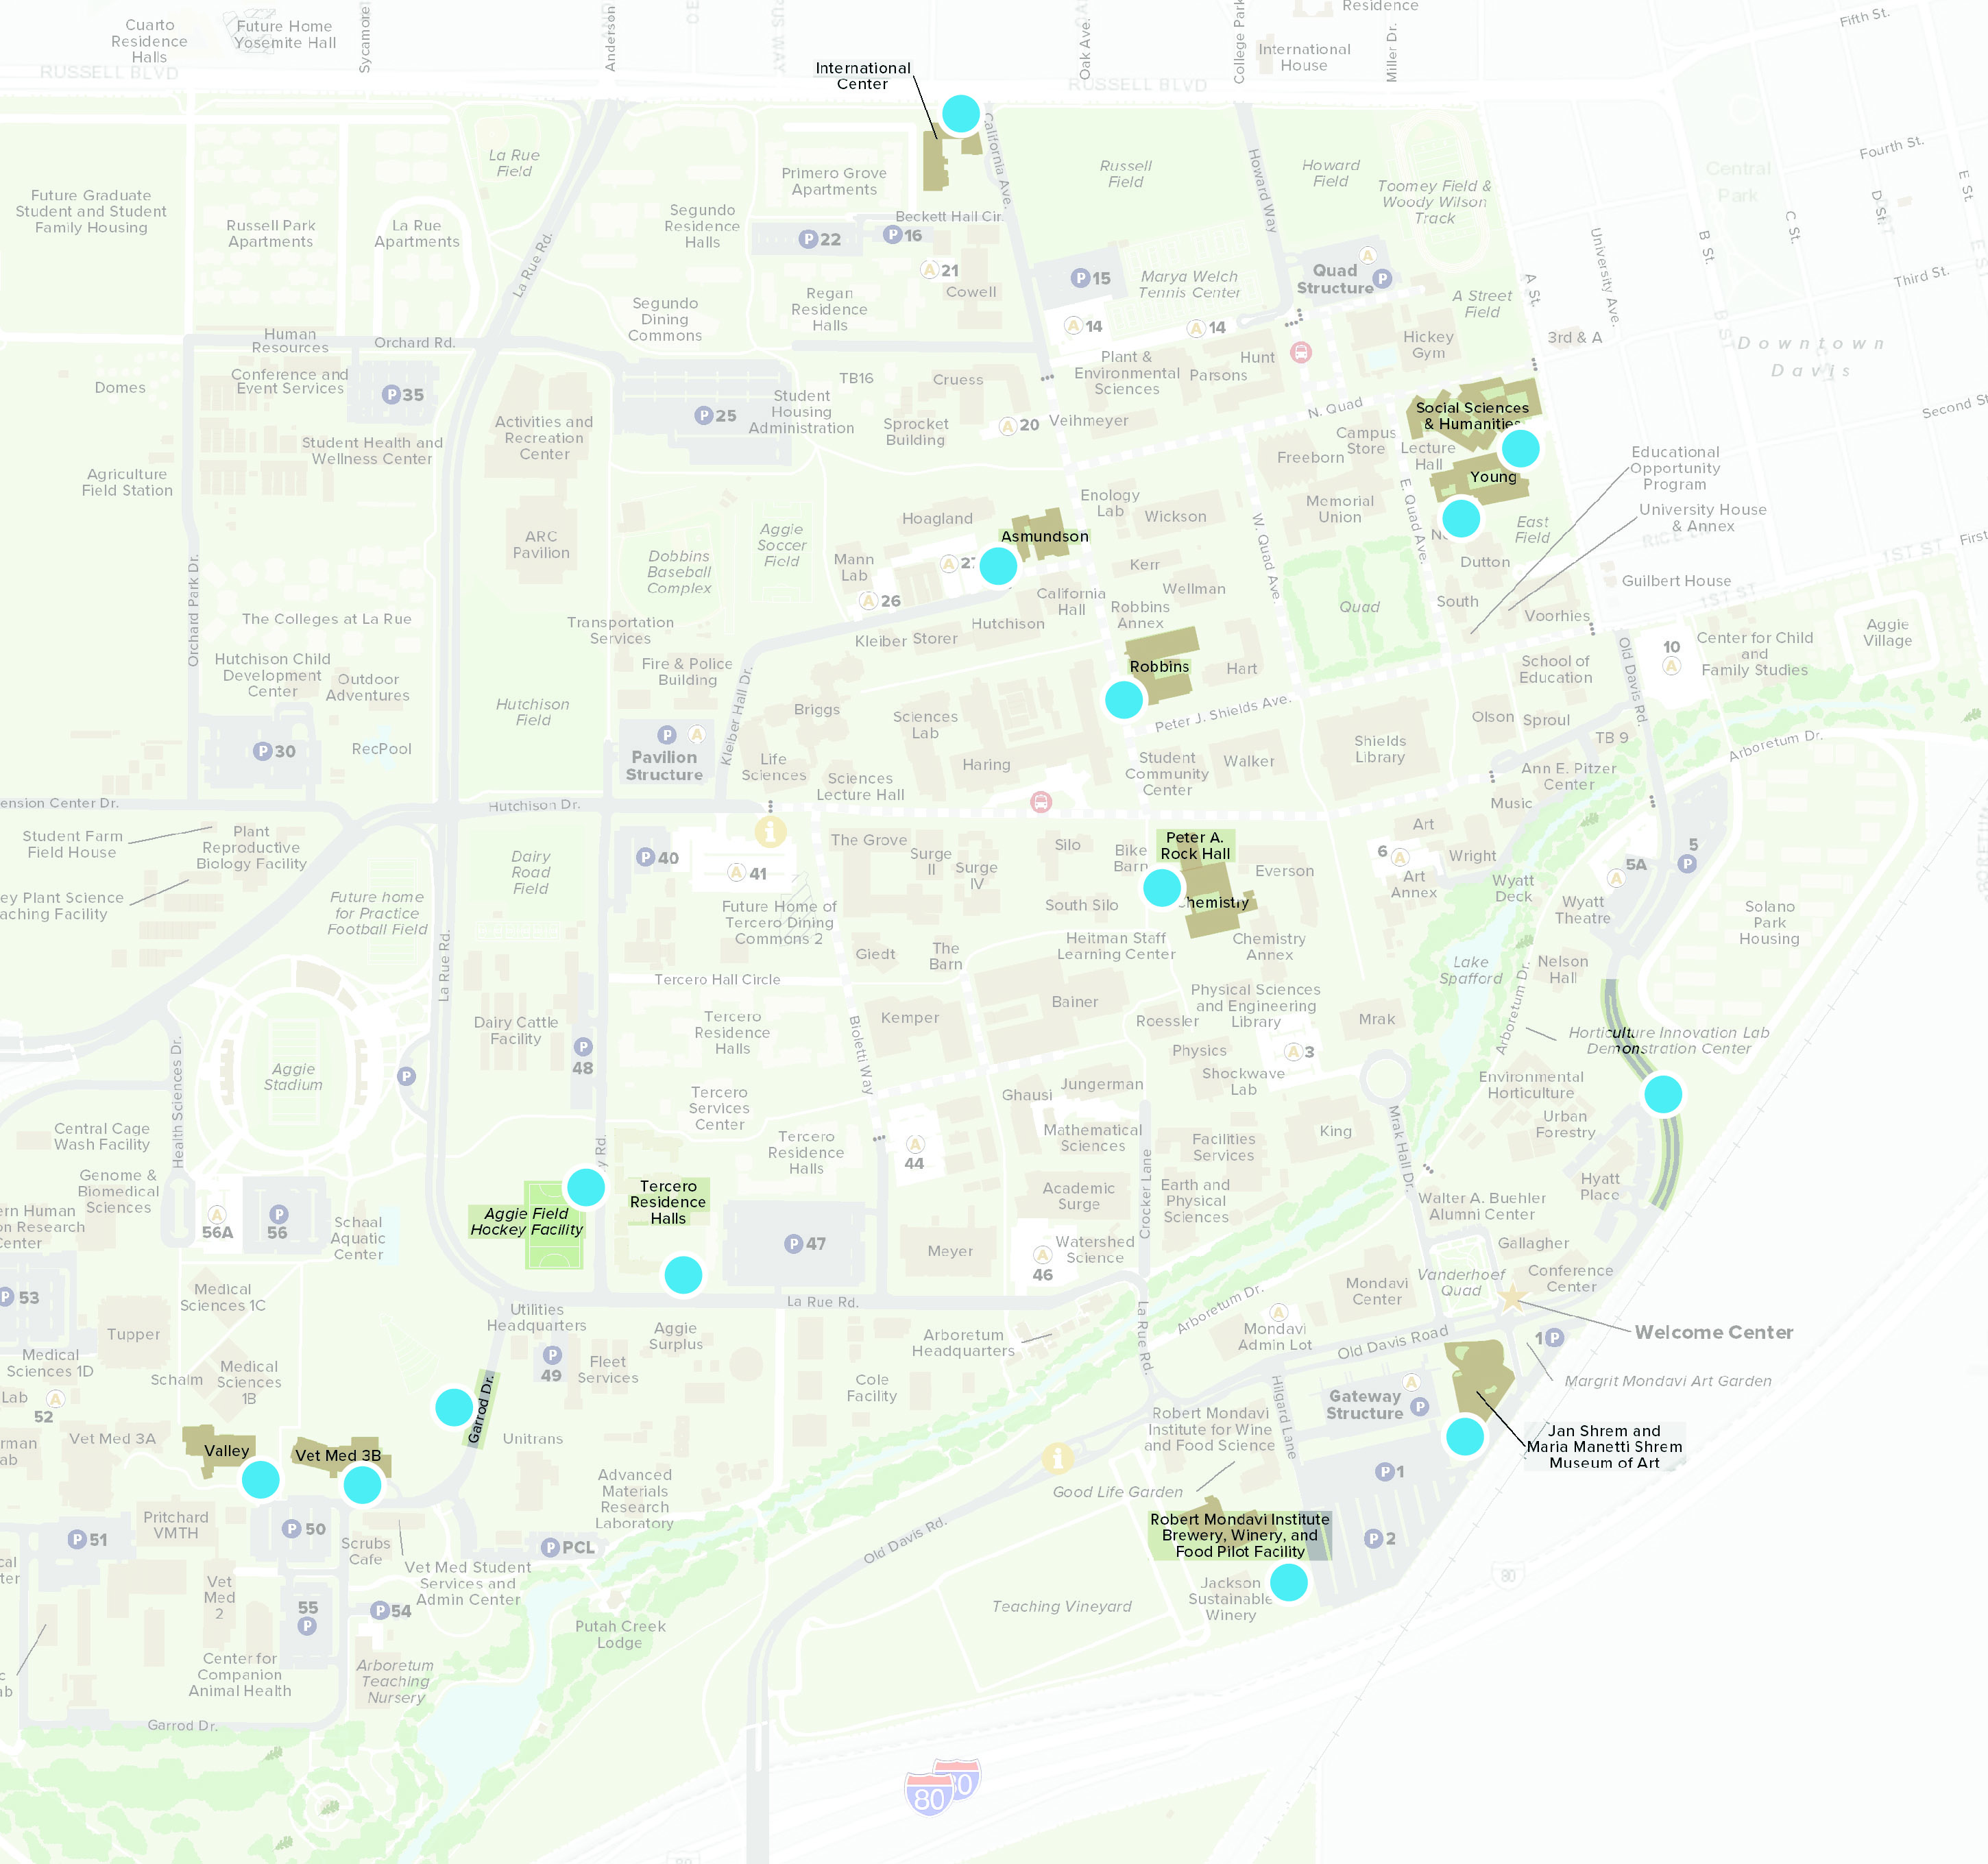 Campus Map of recently completed stormwater infrastructure projects